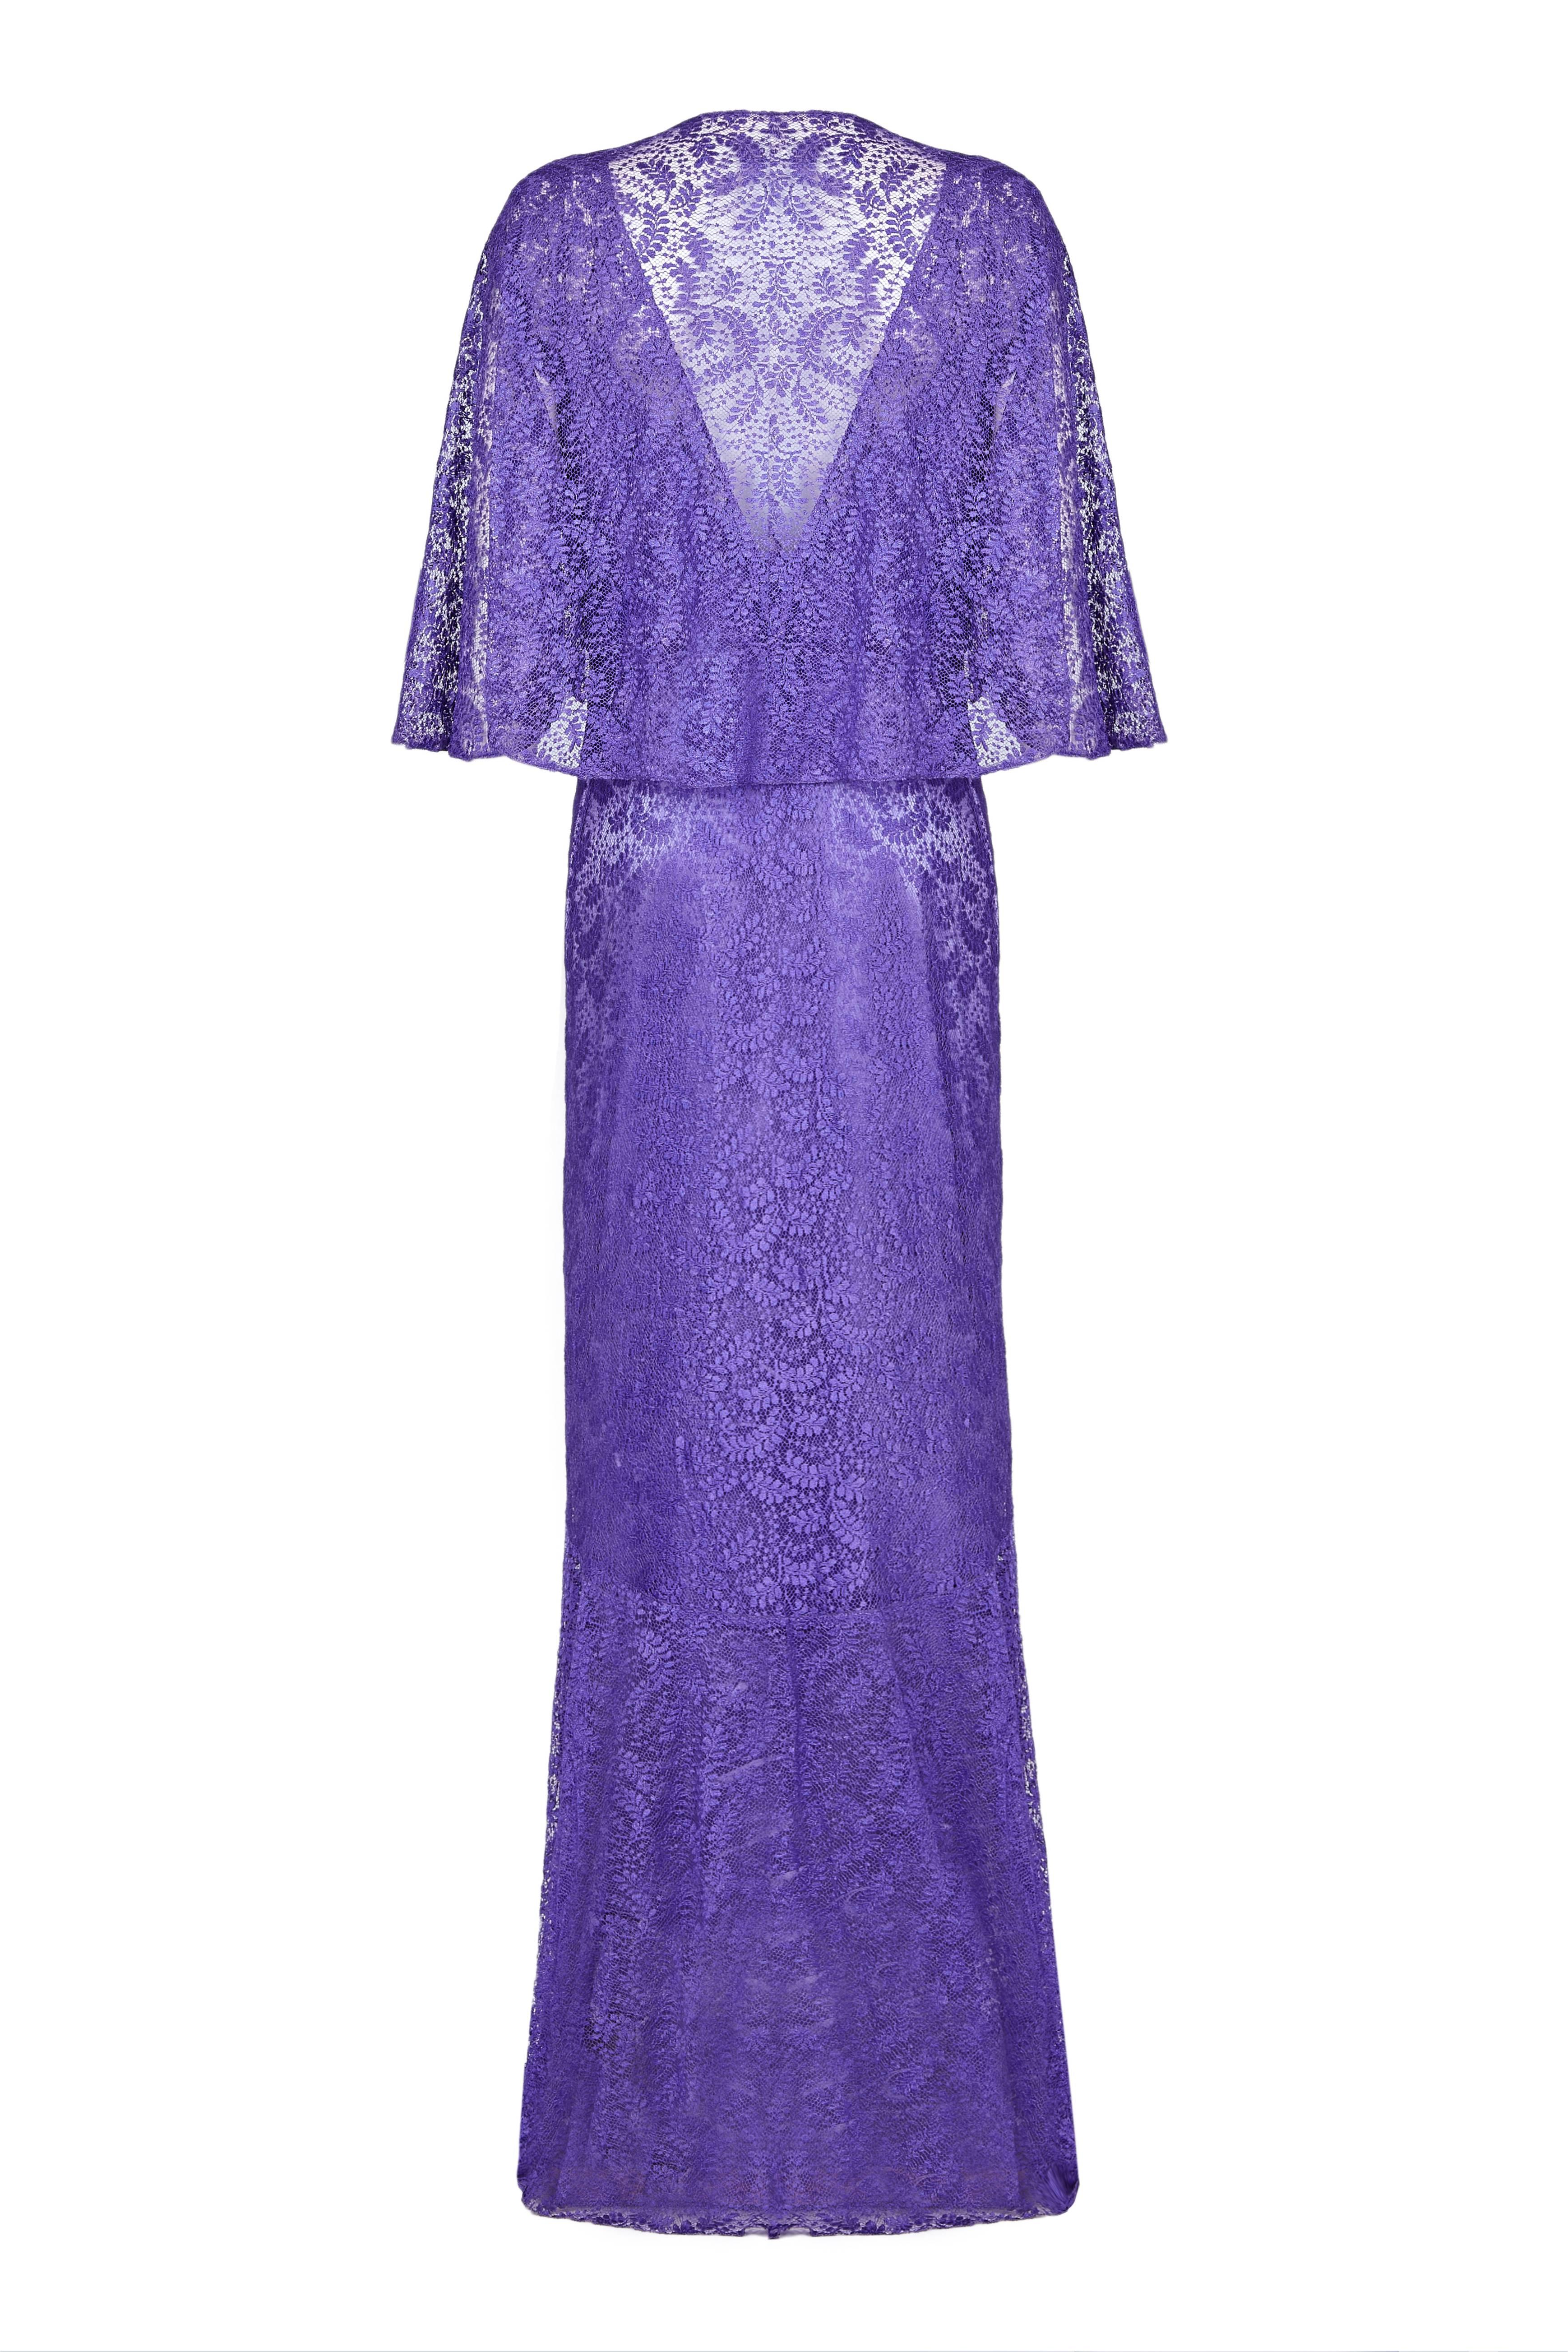 Stunning full length vintage 1930s lace dress in a striking purple with matching caplet/ bolero and original attached slip. It features pretty shaping around the bust, deep V back and kicks out at the bottom of the skirt.  A beautiful piece in